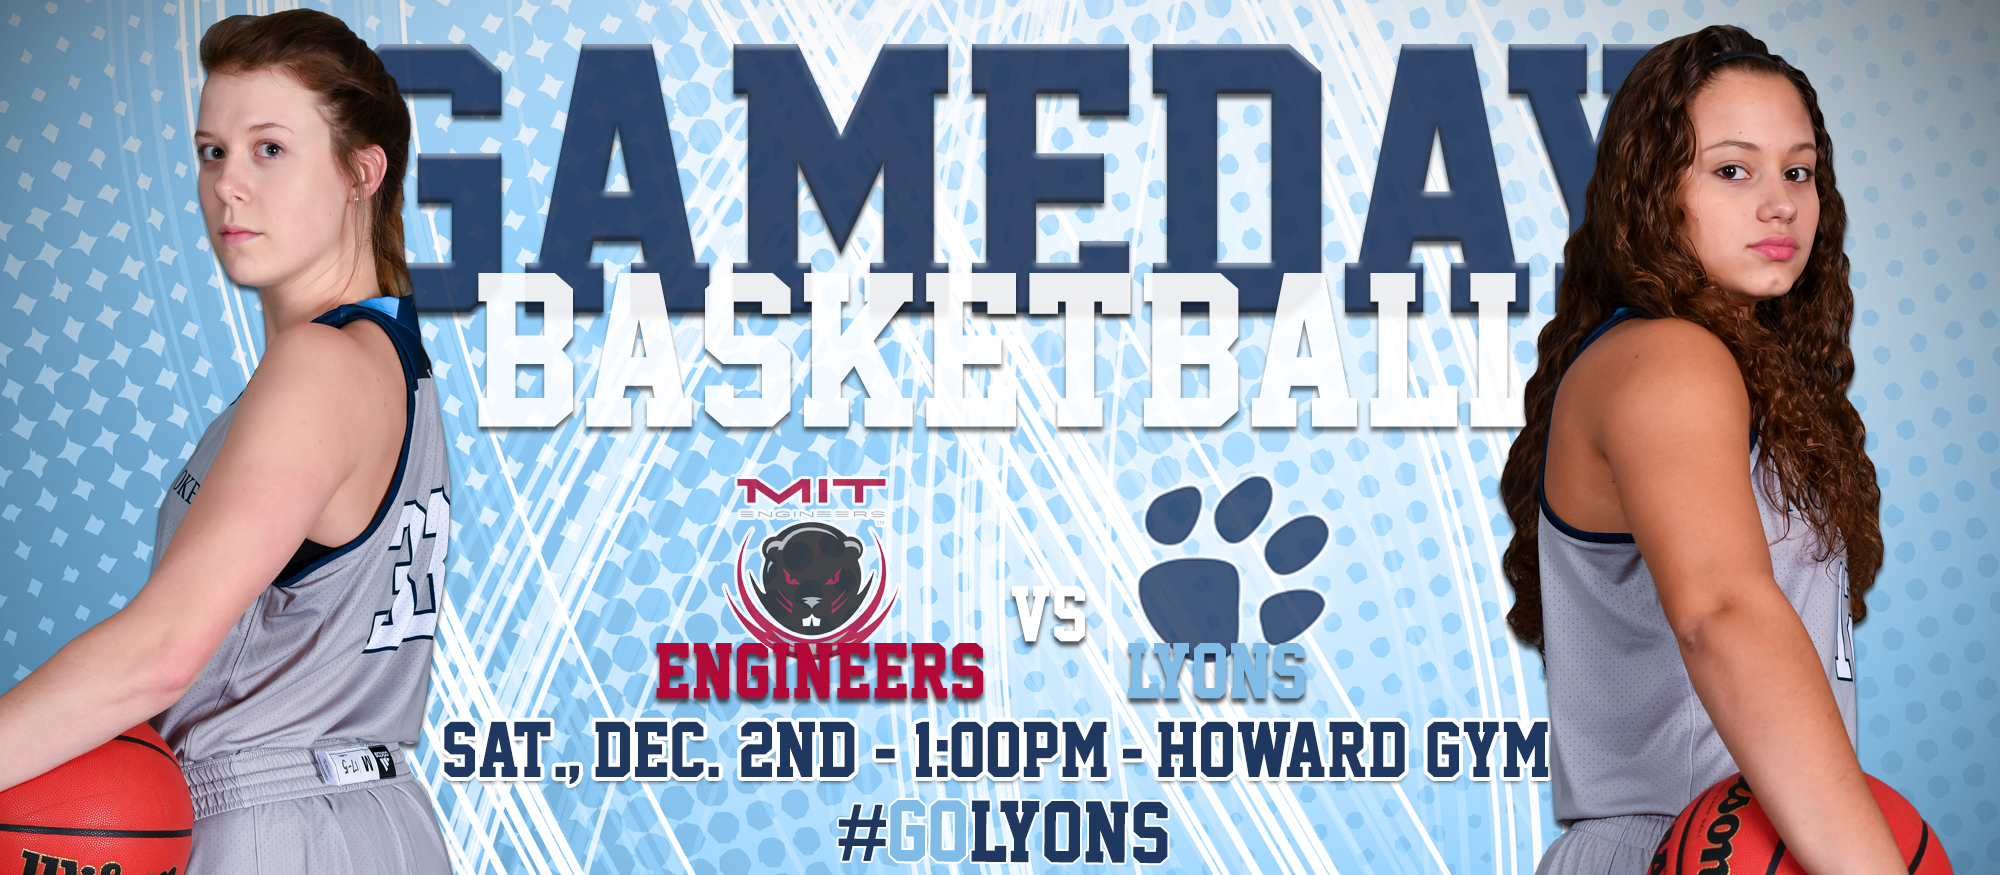 Gameday graphic featuring Lyons basketball players Michaela Butin and Raquel Fitzpatrick promoting the Saturday, December 2nd home game at 1pm against MIT at the Howard Gym.